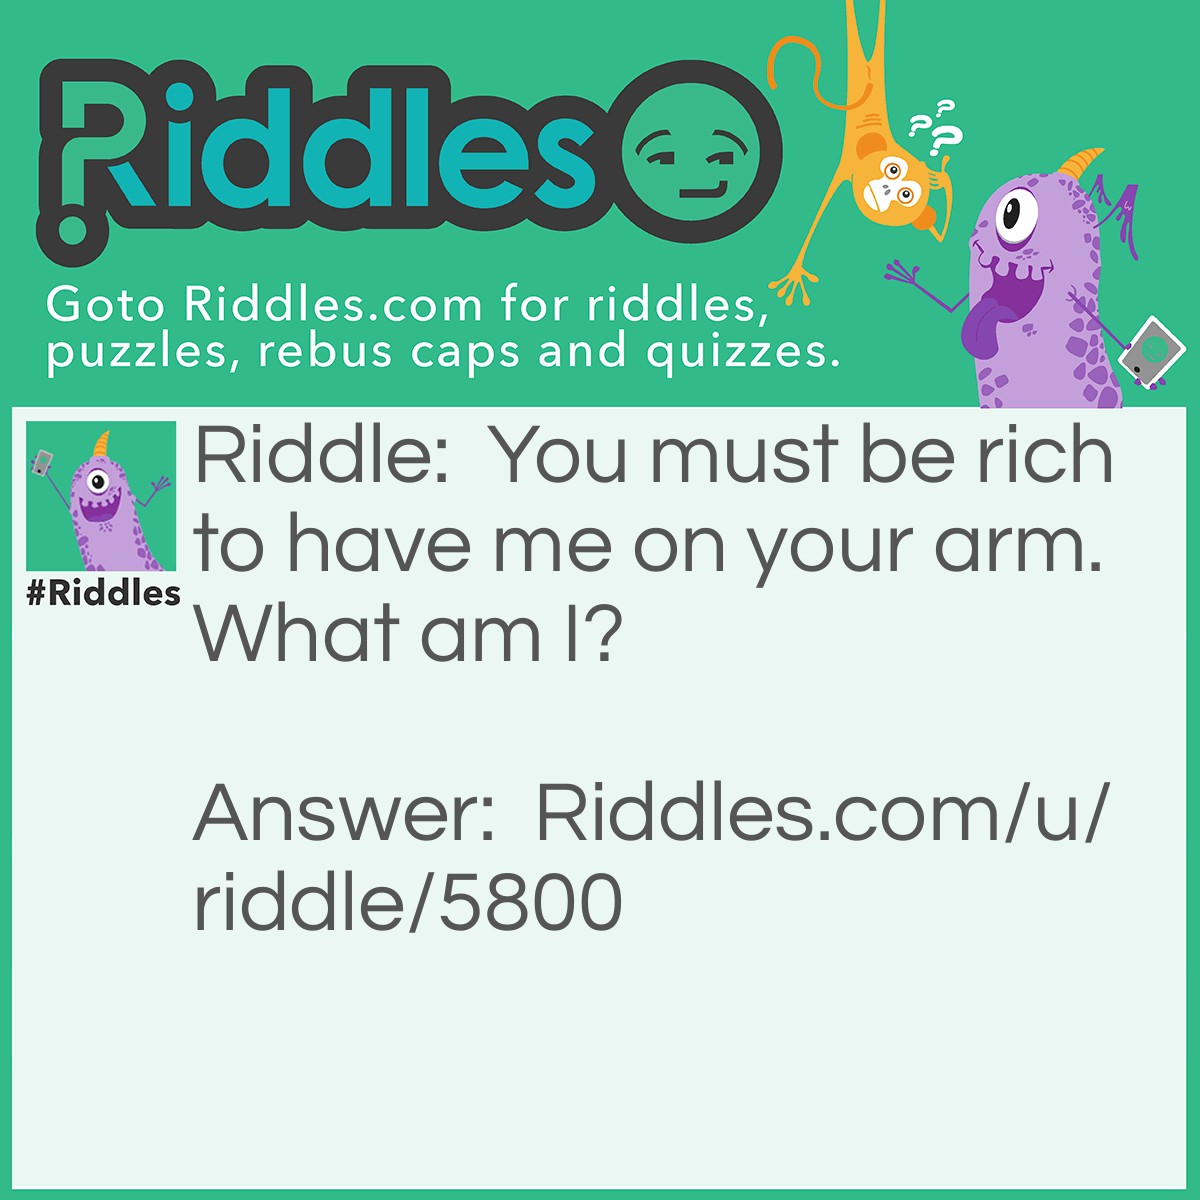 Riddle: You must be rich to have me on your arm. What am I? Answer: A bracelet.